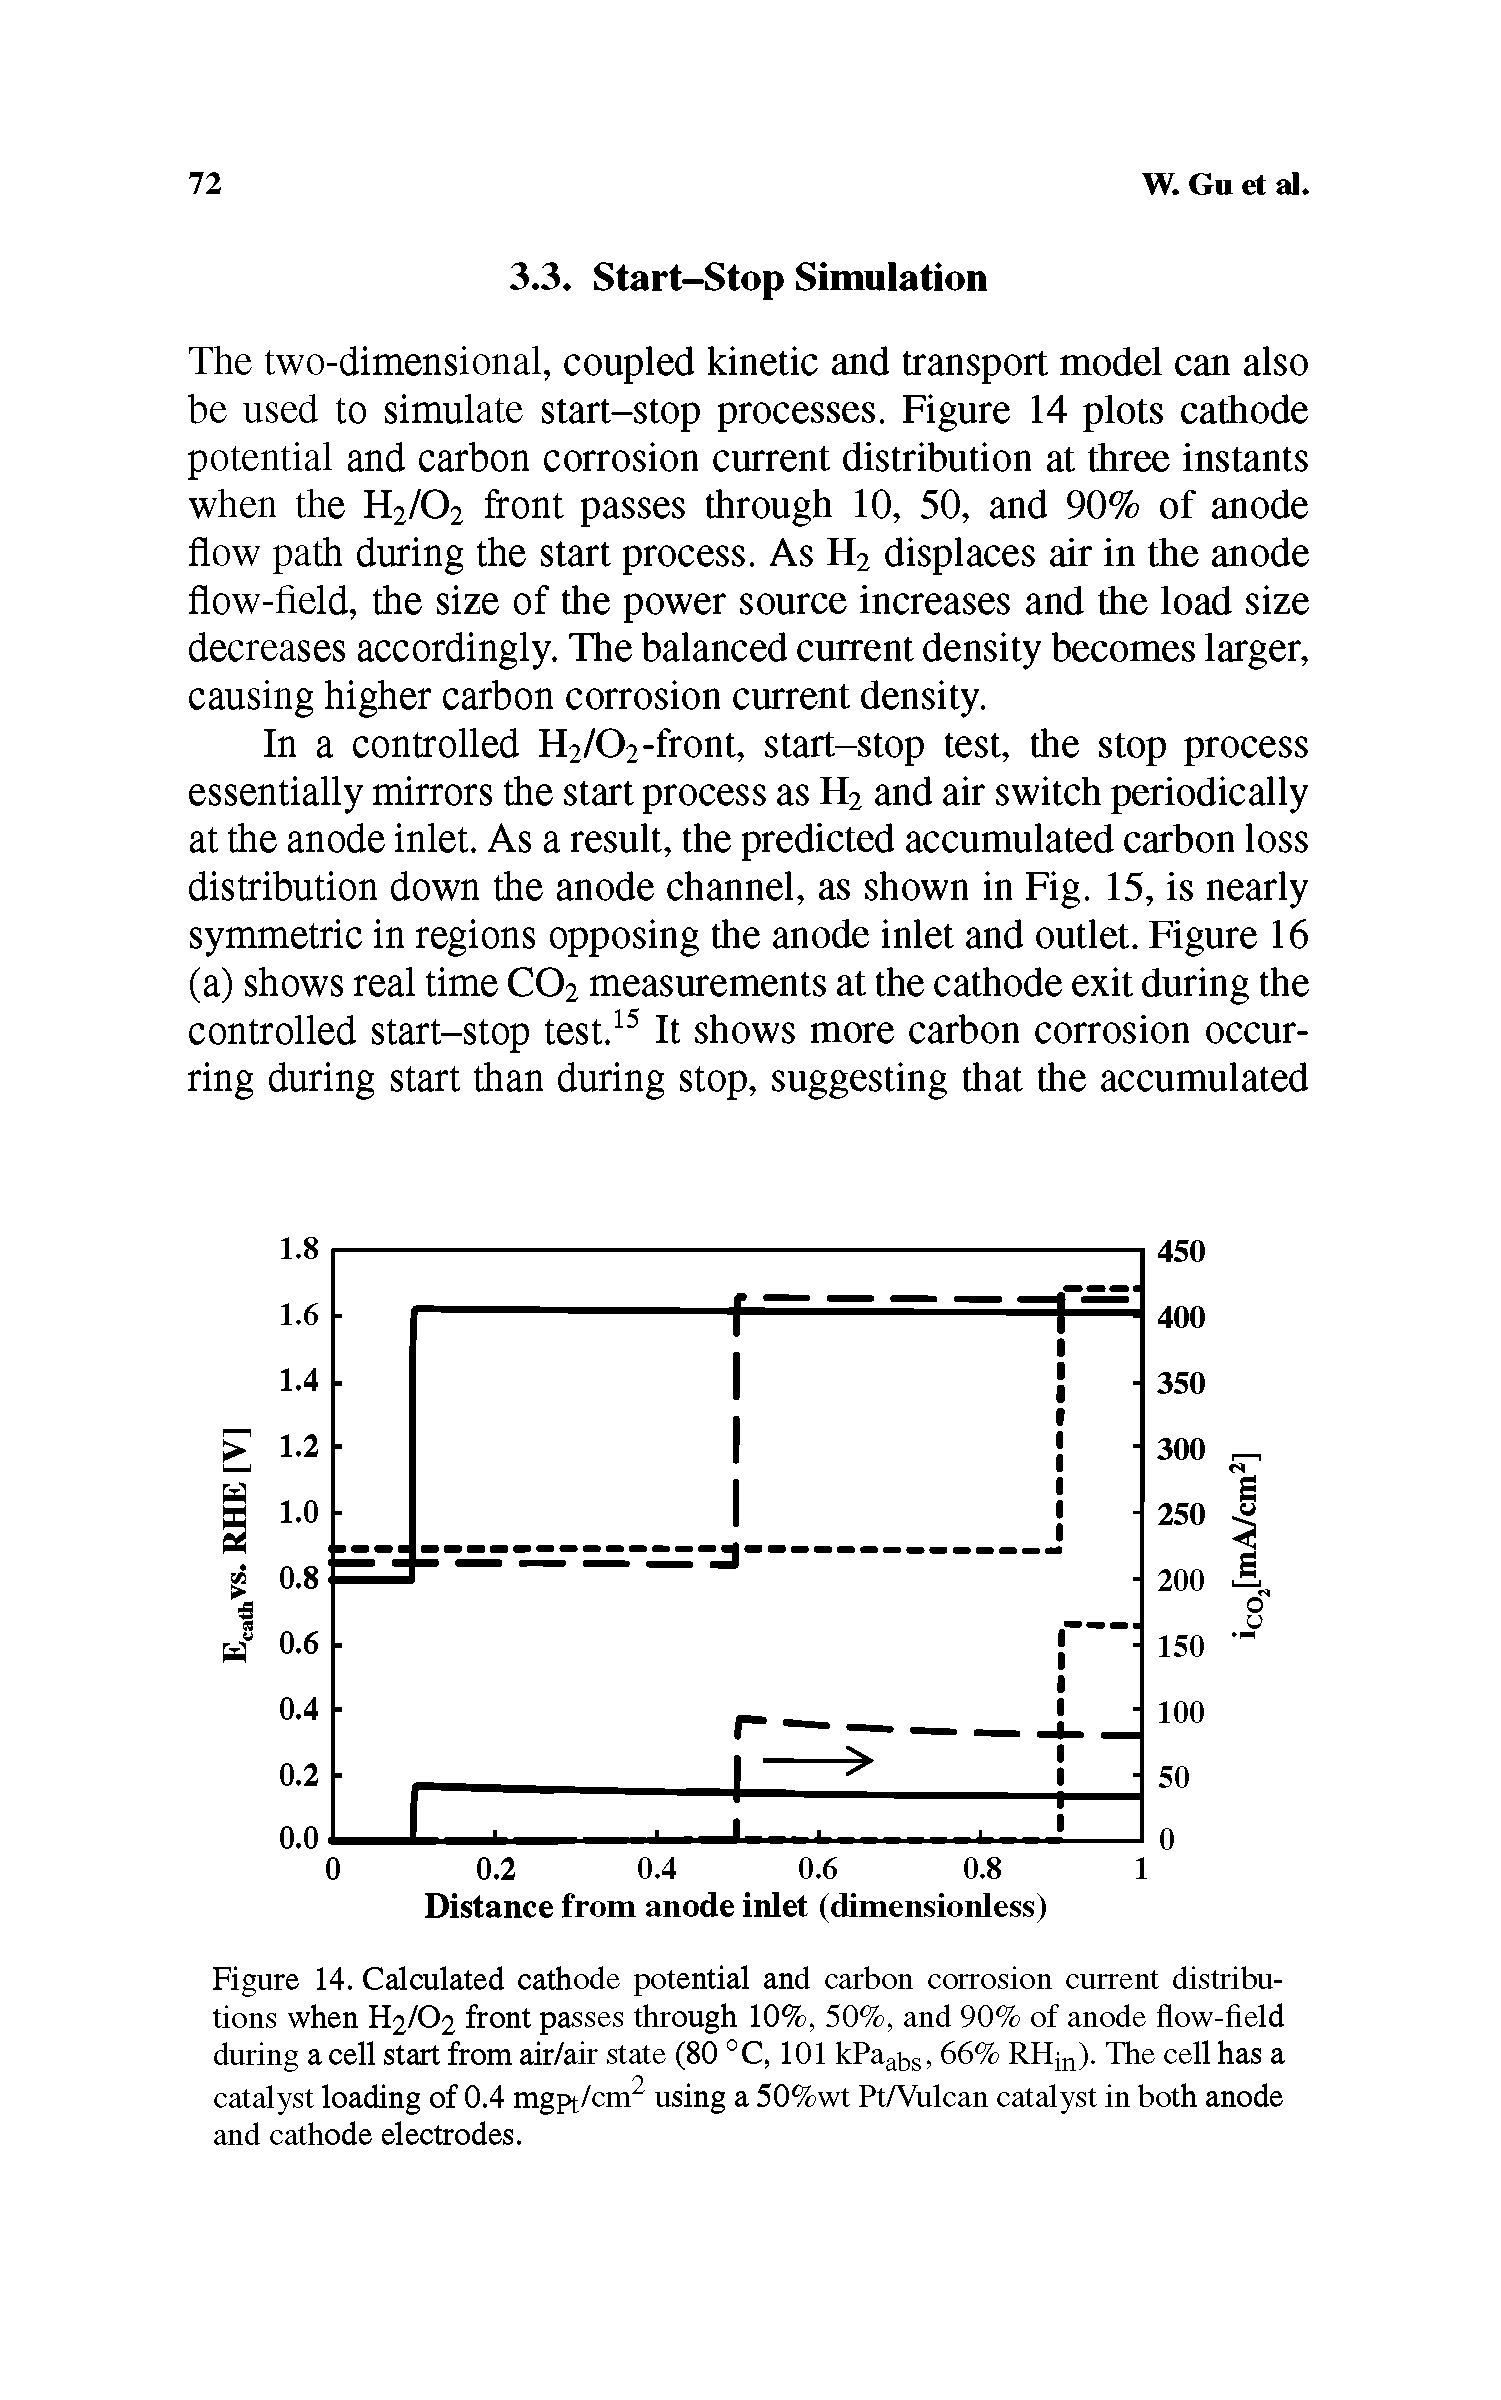 Figure 14. Calculated cathode potential and carbon corrosion current distributions when H2/02 front passes through 10%, 50%, and 90% of anode flow-field during a cell start from air/air state (80 0 C, 101 kPaabs, 66% RHin). The cell has a catalyst loading of 0.4 mgpt/cm2 using a 50%wt Pt/Vulcan catalyst in both anode and cathode electrodes.